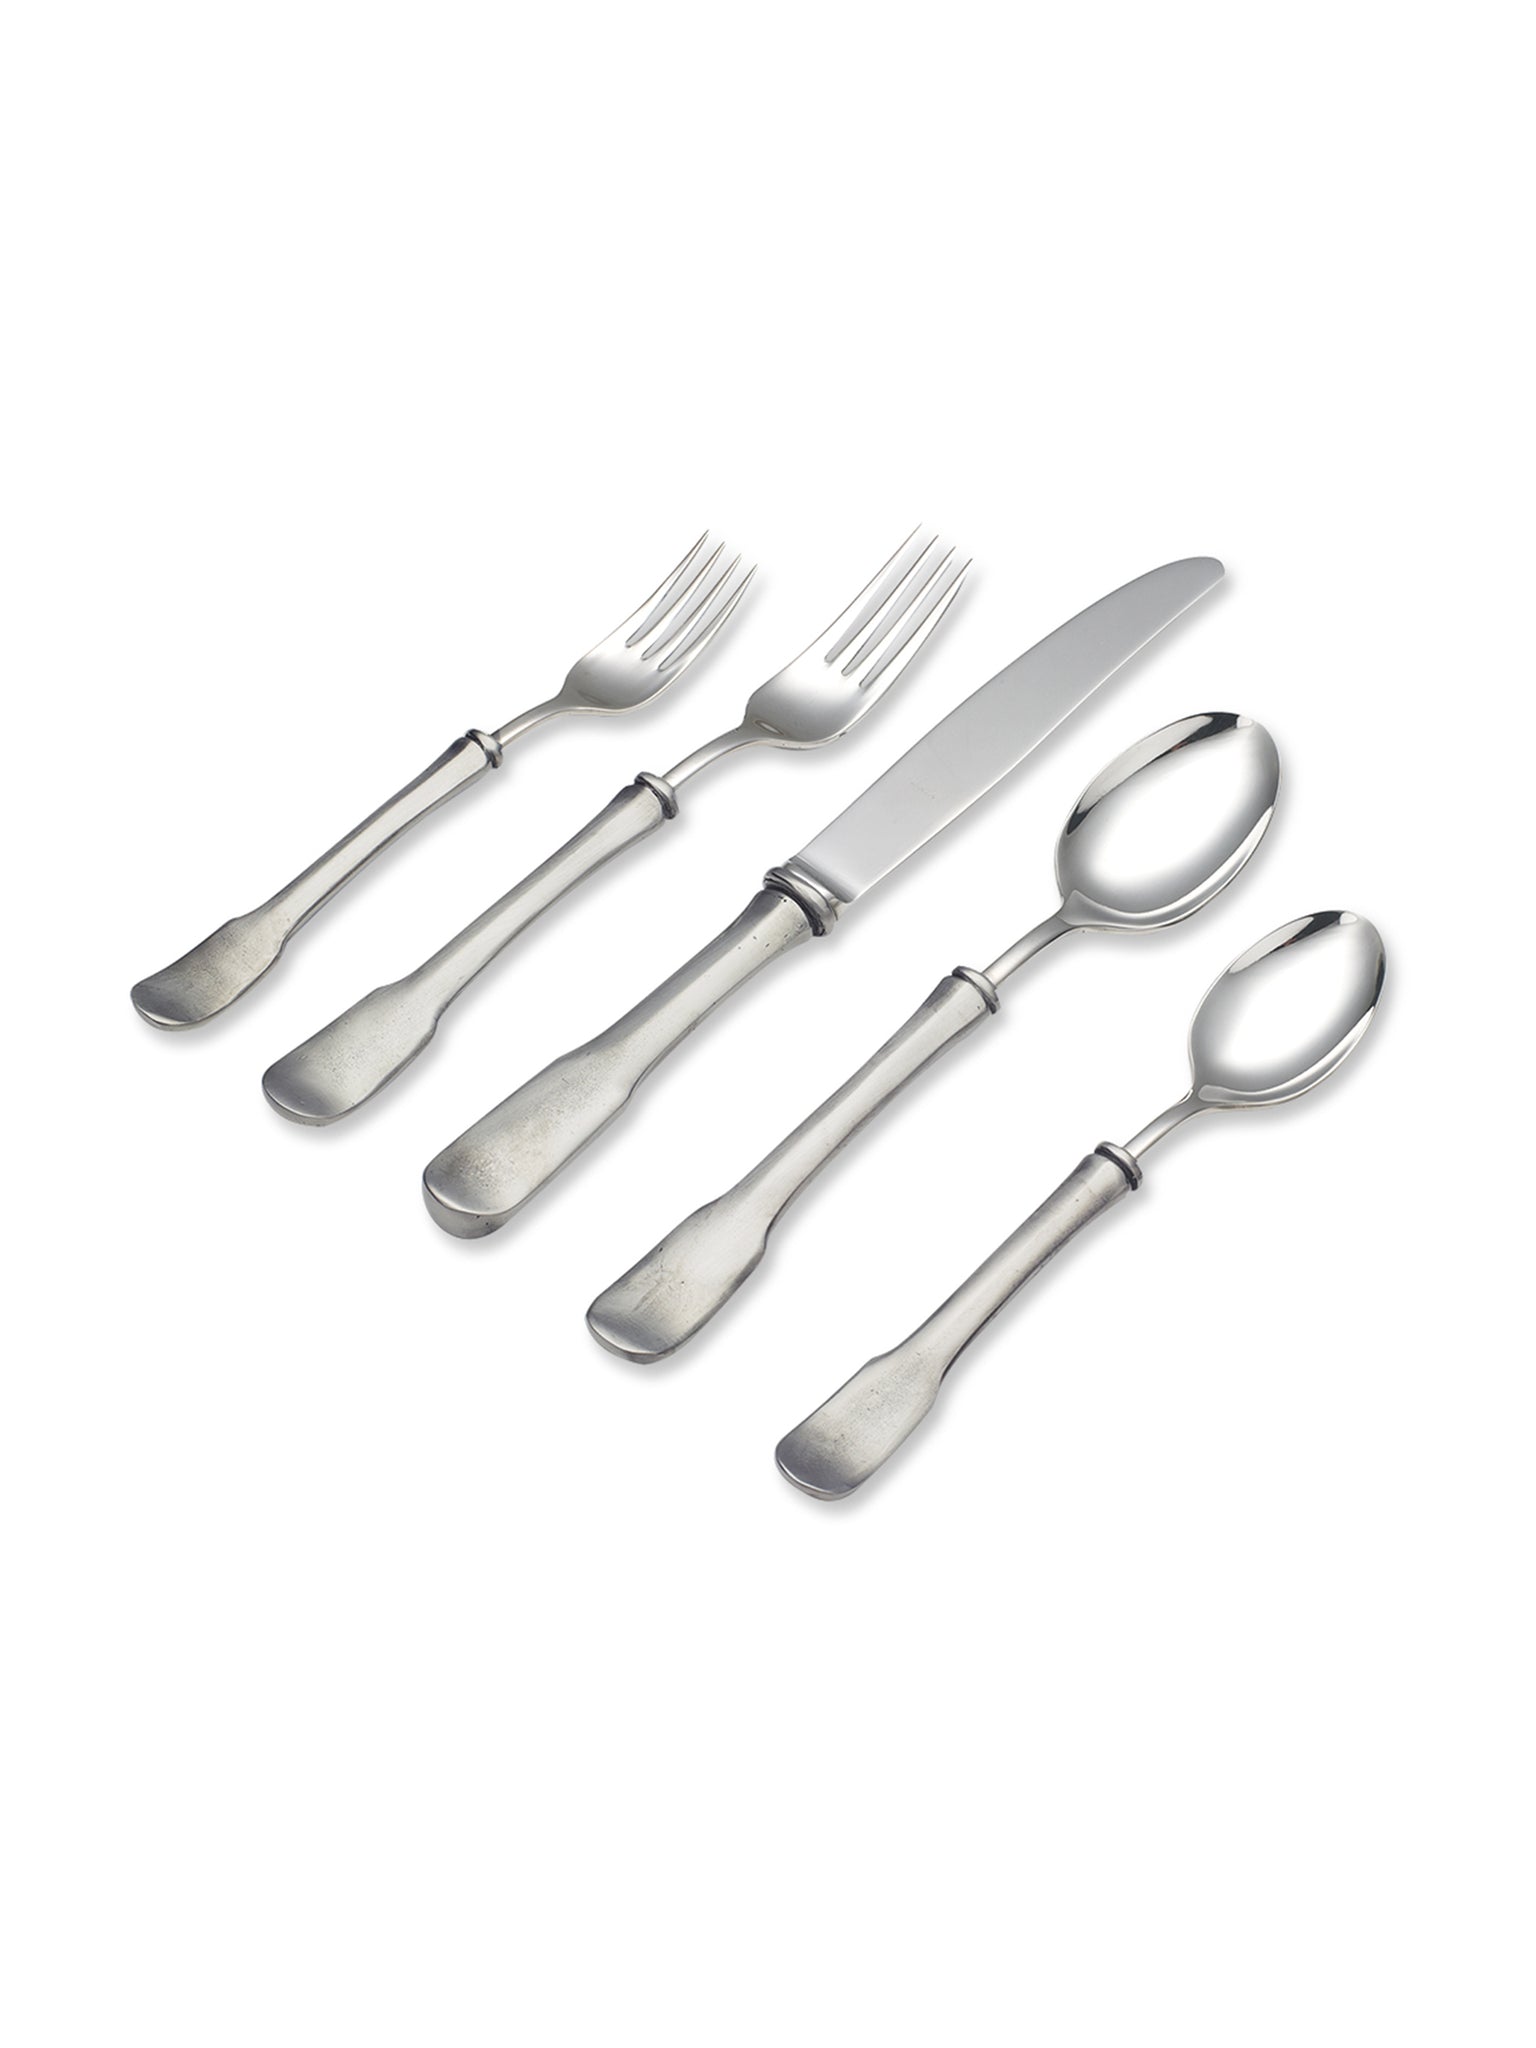 MATCH Pewter Olivia 5 Piece Place Setting Weston Table